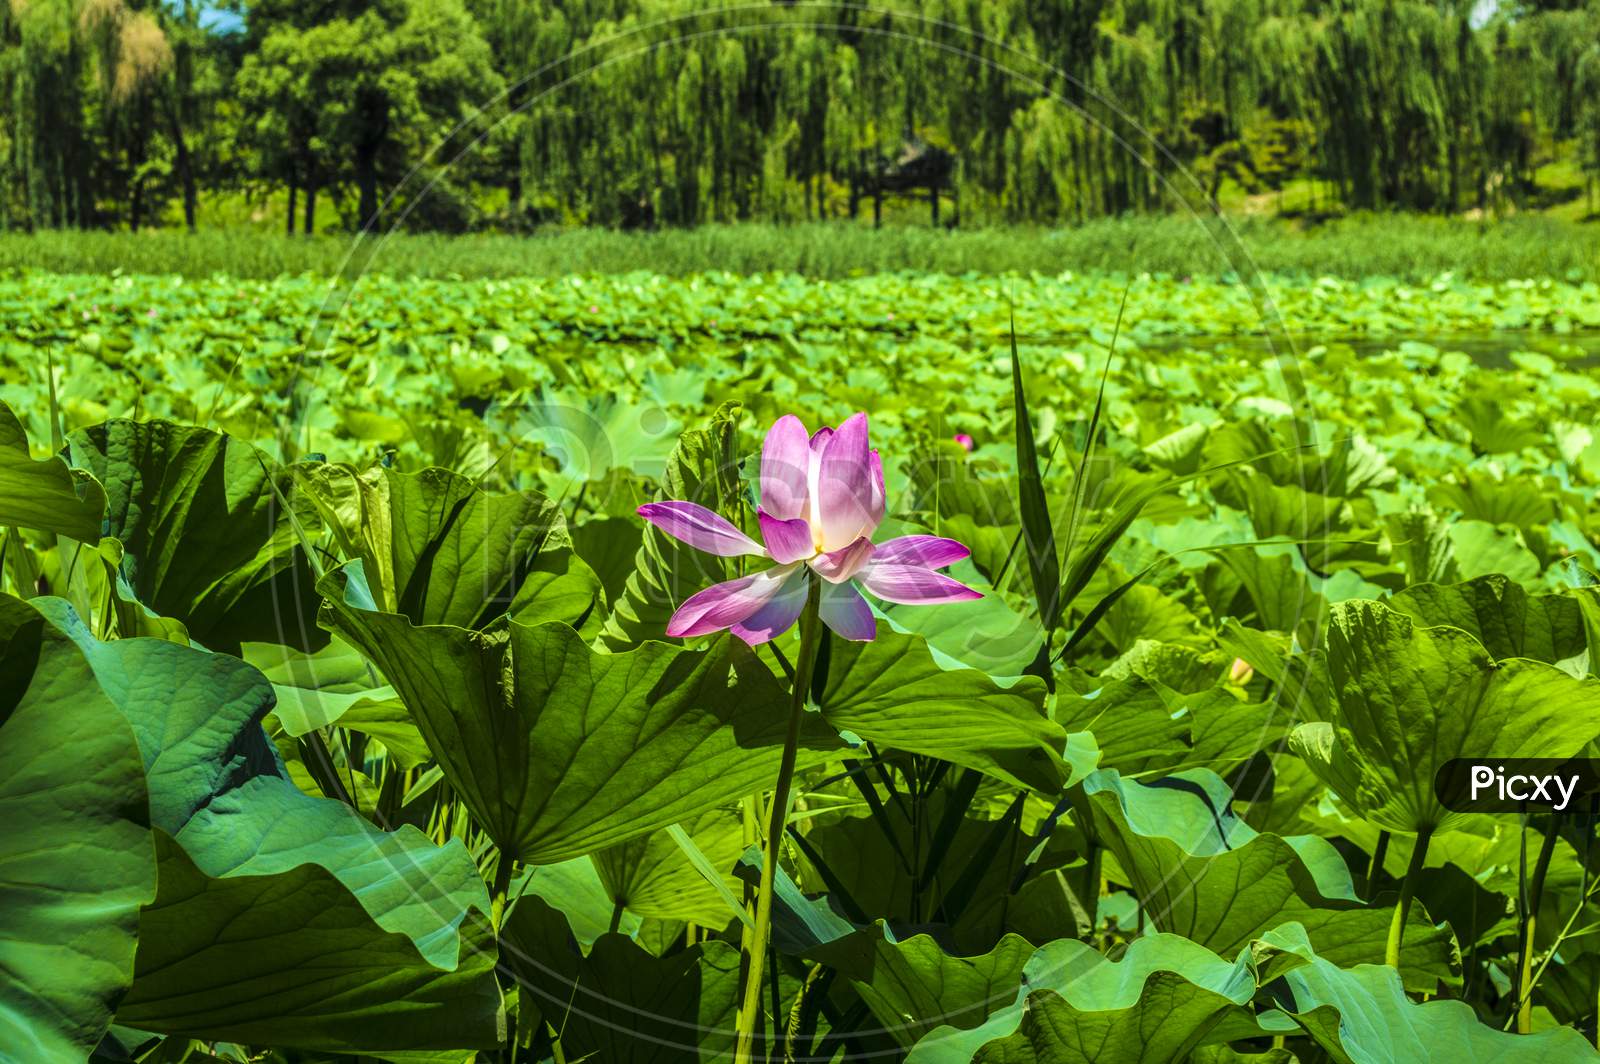 Lotus Flower Pink Waterlily Above The Lotus Leaves In A Pond In Beijing, China